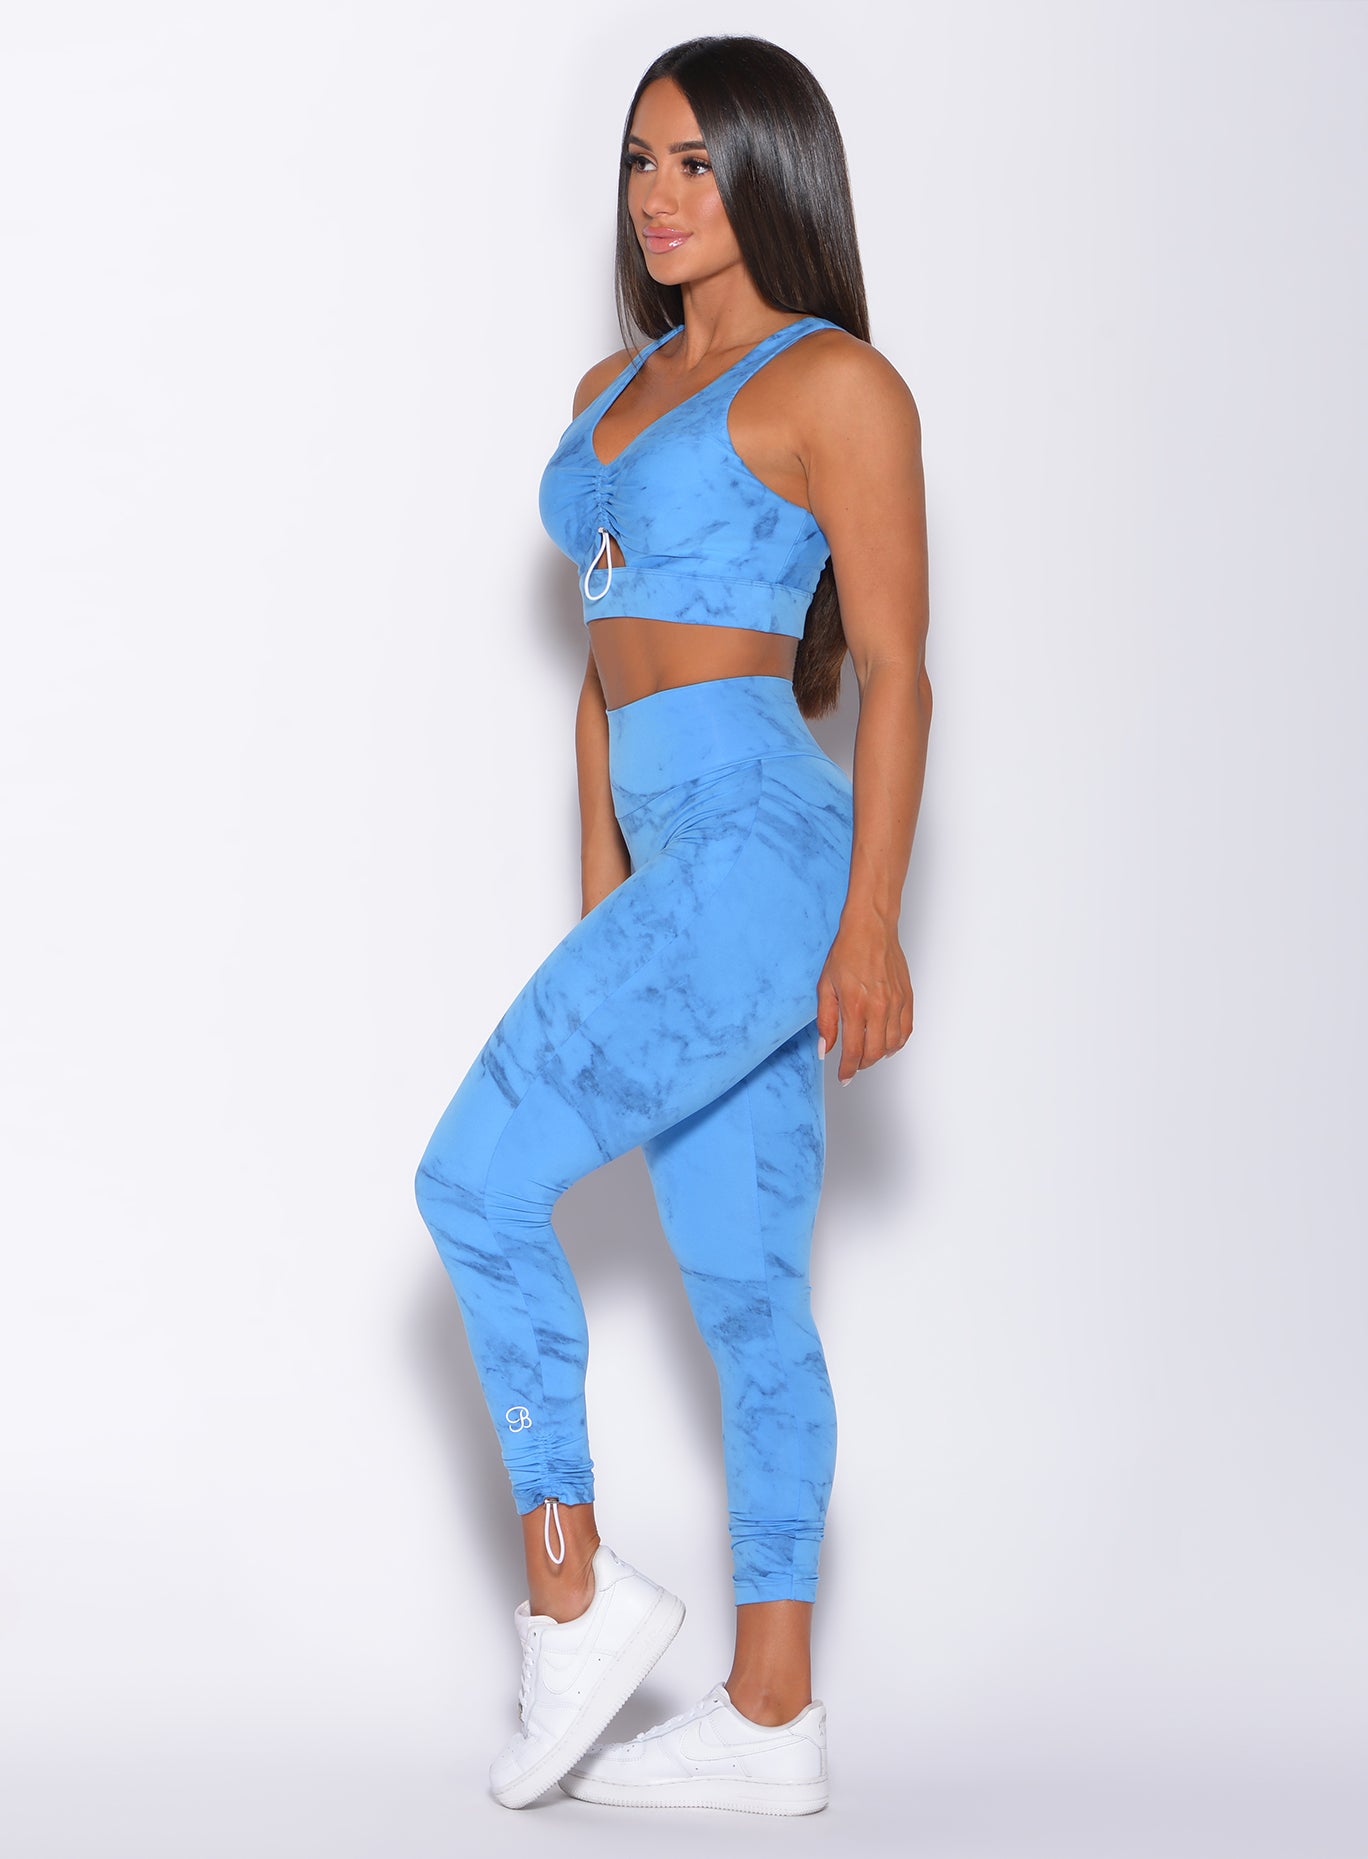 Left side profile view of a model wearing our adjustable leggings in blue marble color and a matching bra